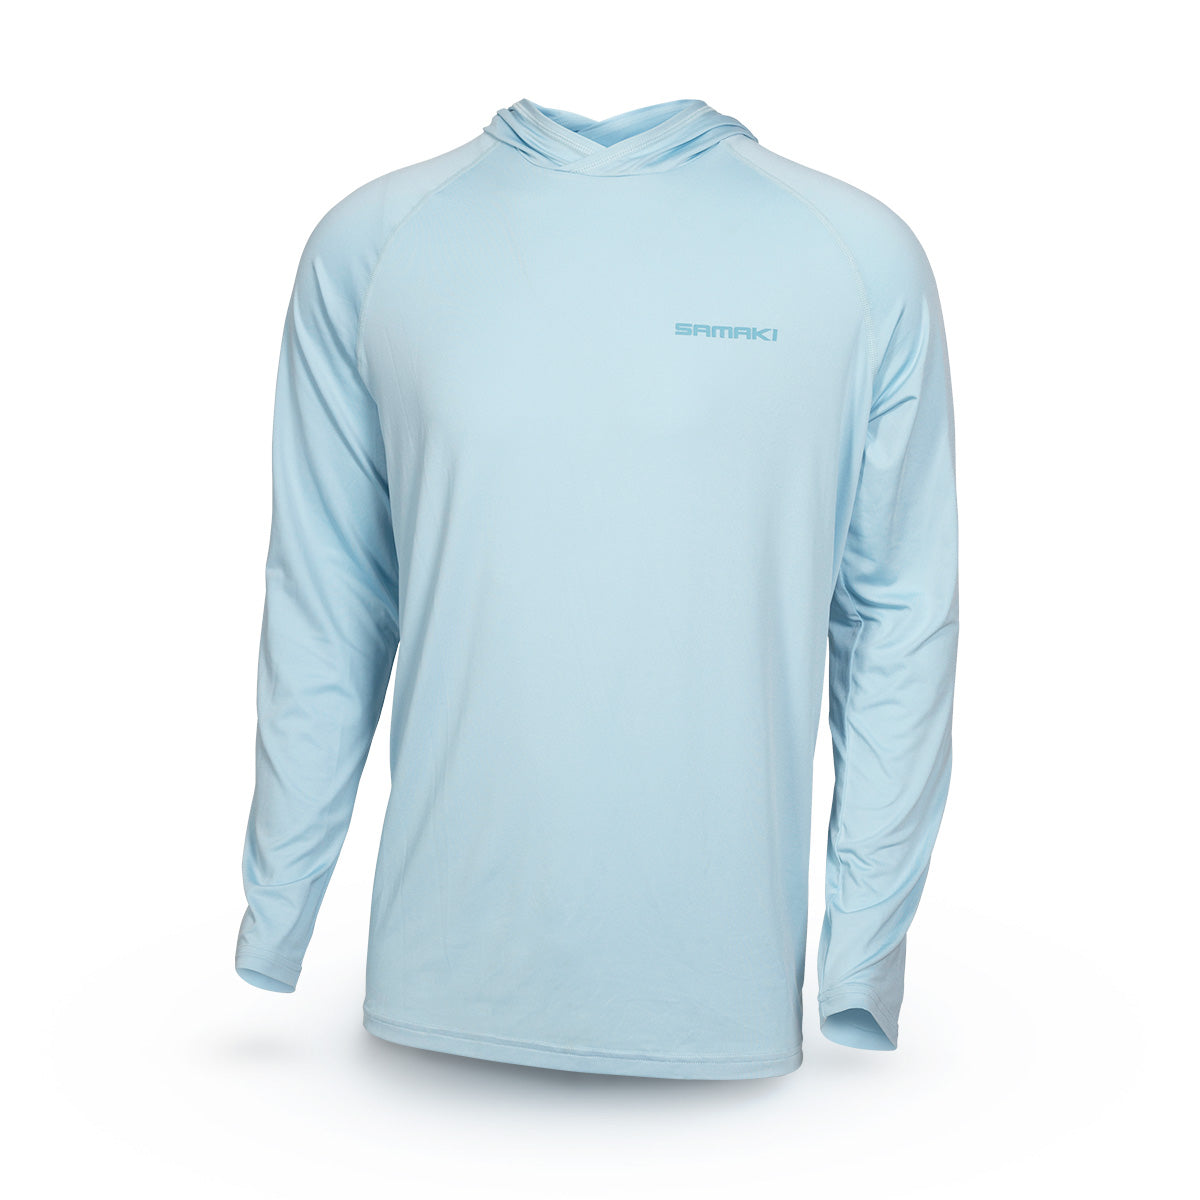 Stealth Hooded Performance Shirt Youth